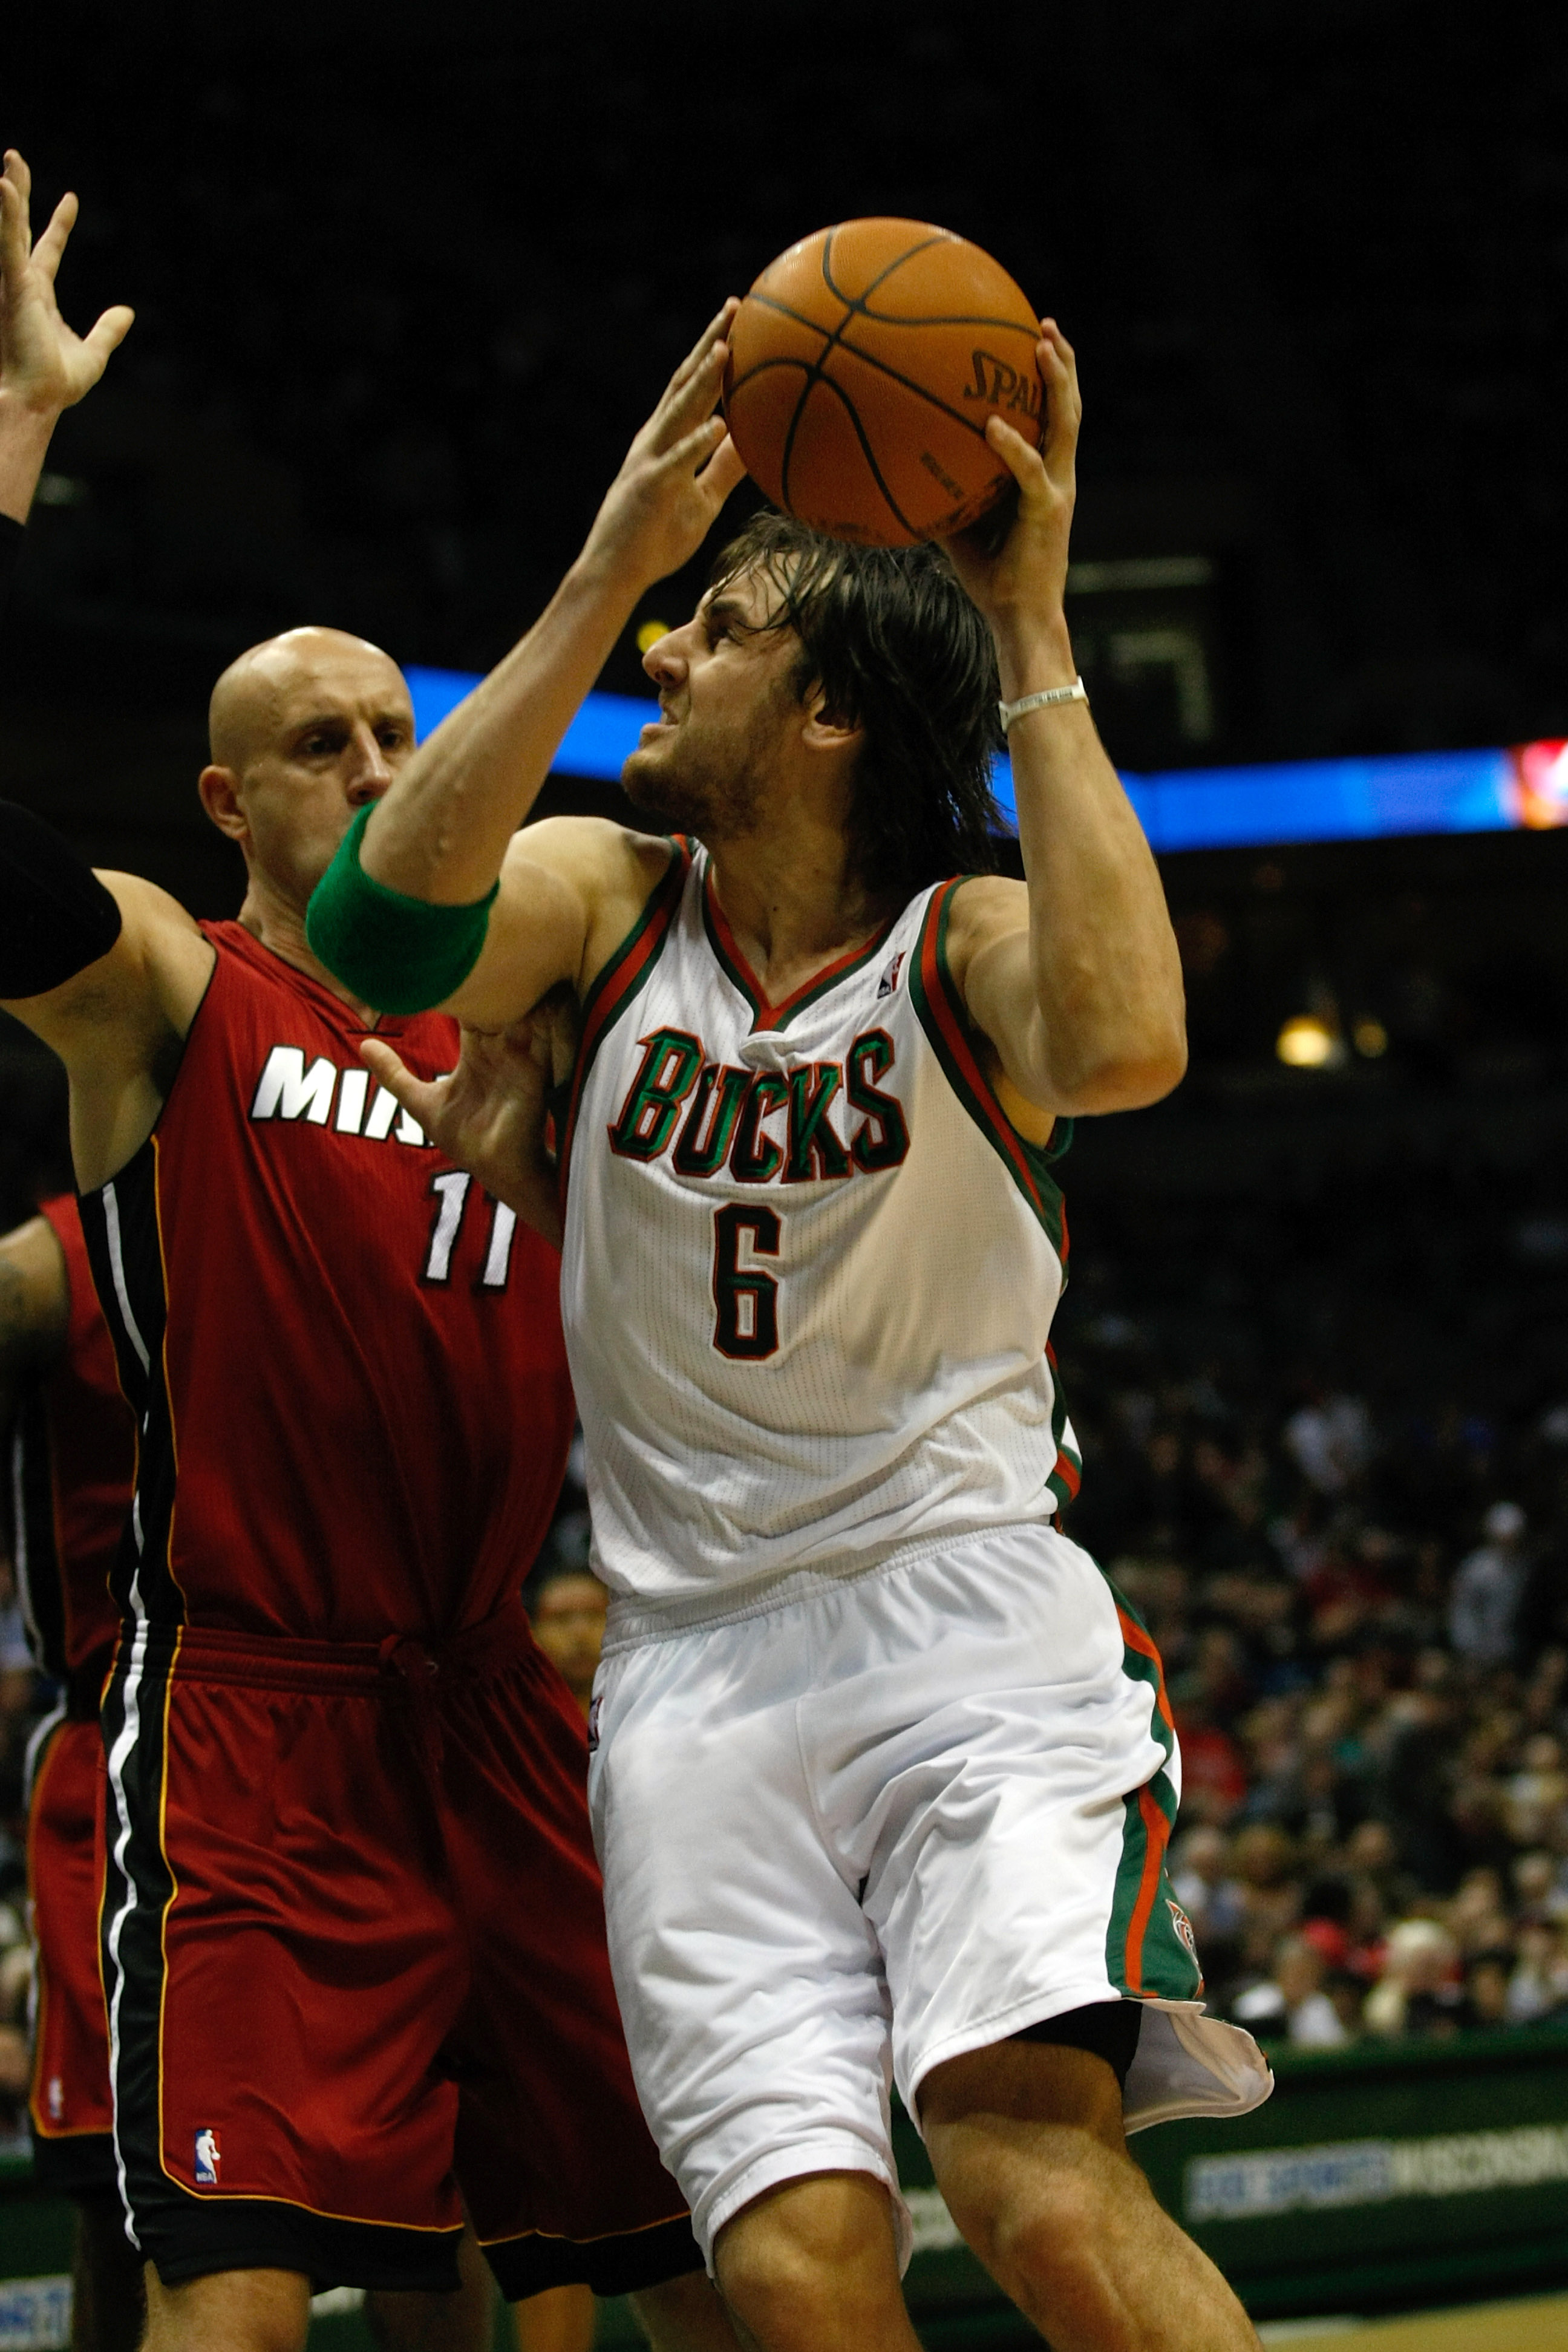 MILWAUKEE, WI - JANUARY 07: Andrew Bogut #6 of the Milwaukee Bucks shoots against the Miami Heat at the Bradley Center on January 7, 2011 in Milwaukee, Wisconsin. NOTE TO USER: User expressly acknowledges and agrees that, by downloading and or using this 